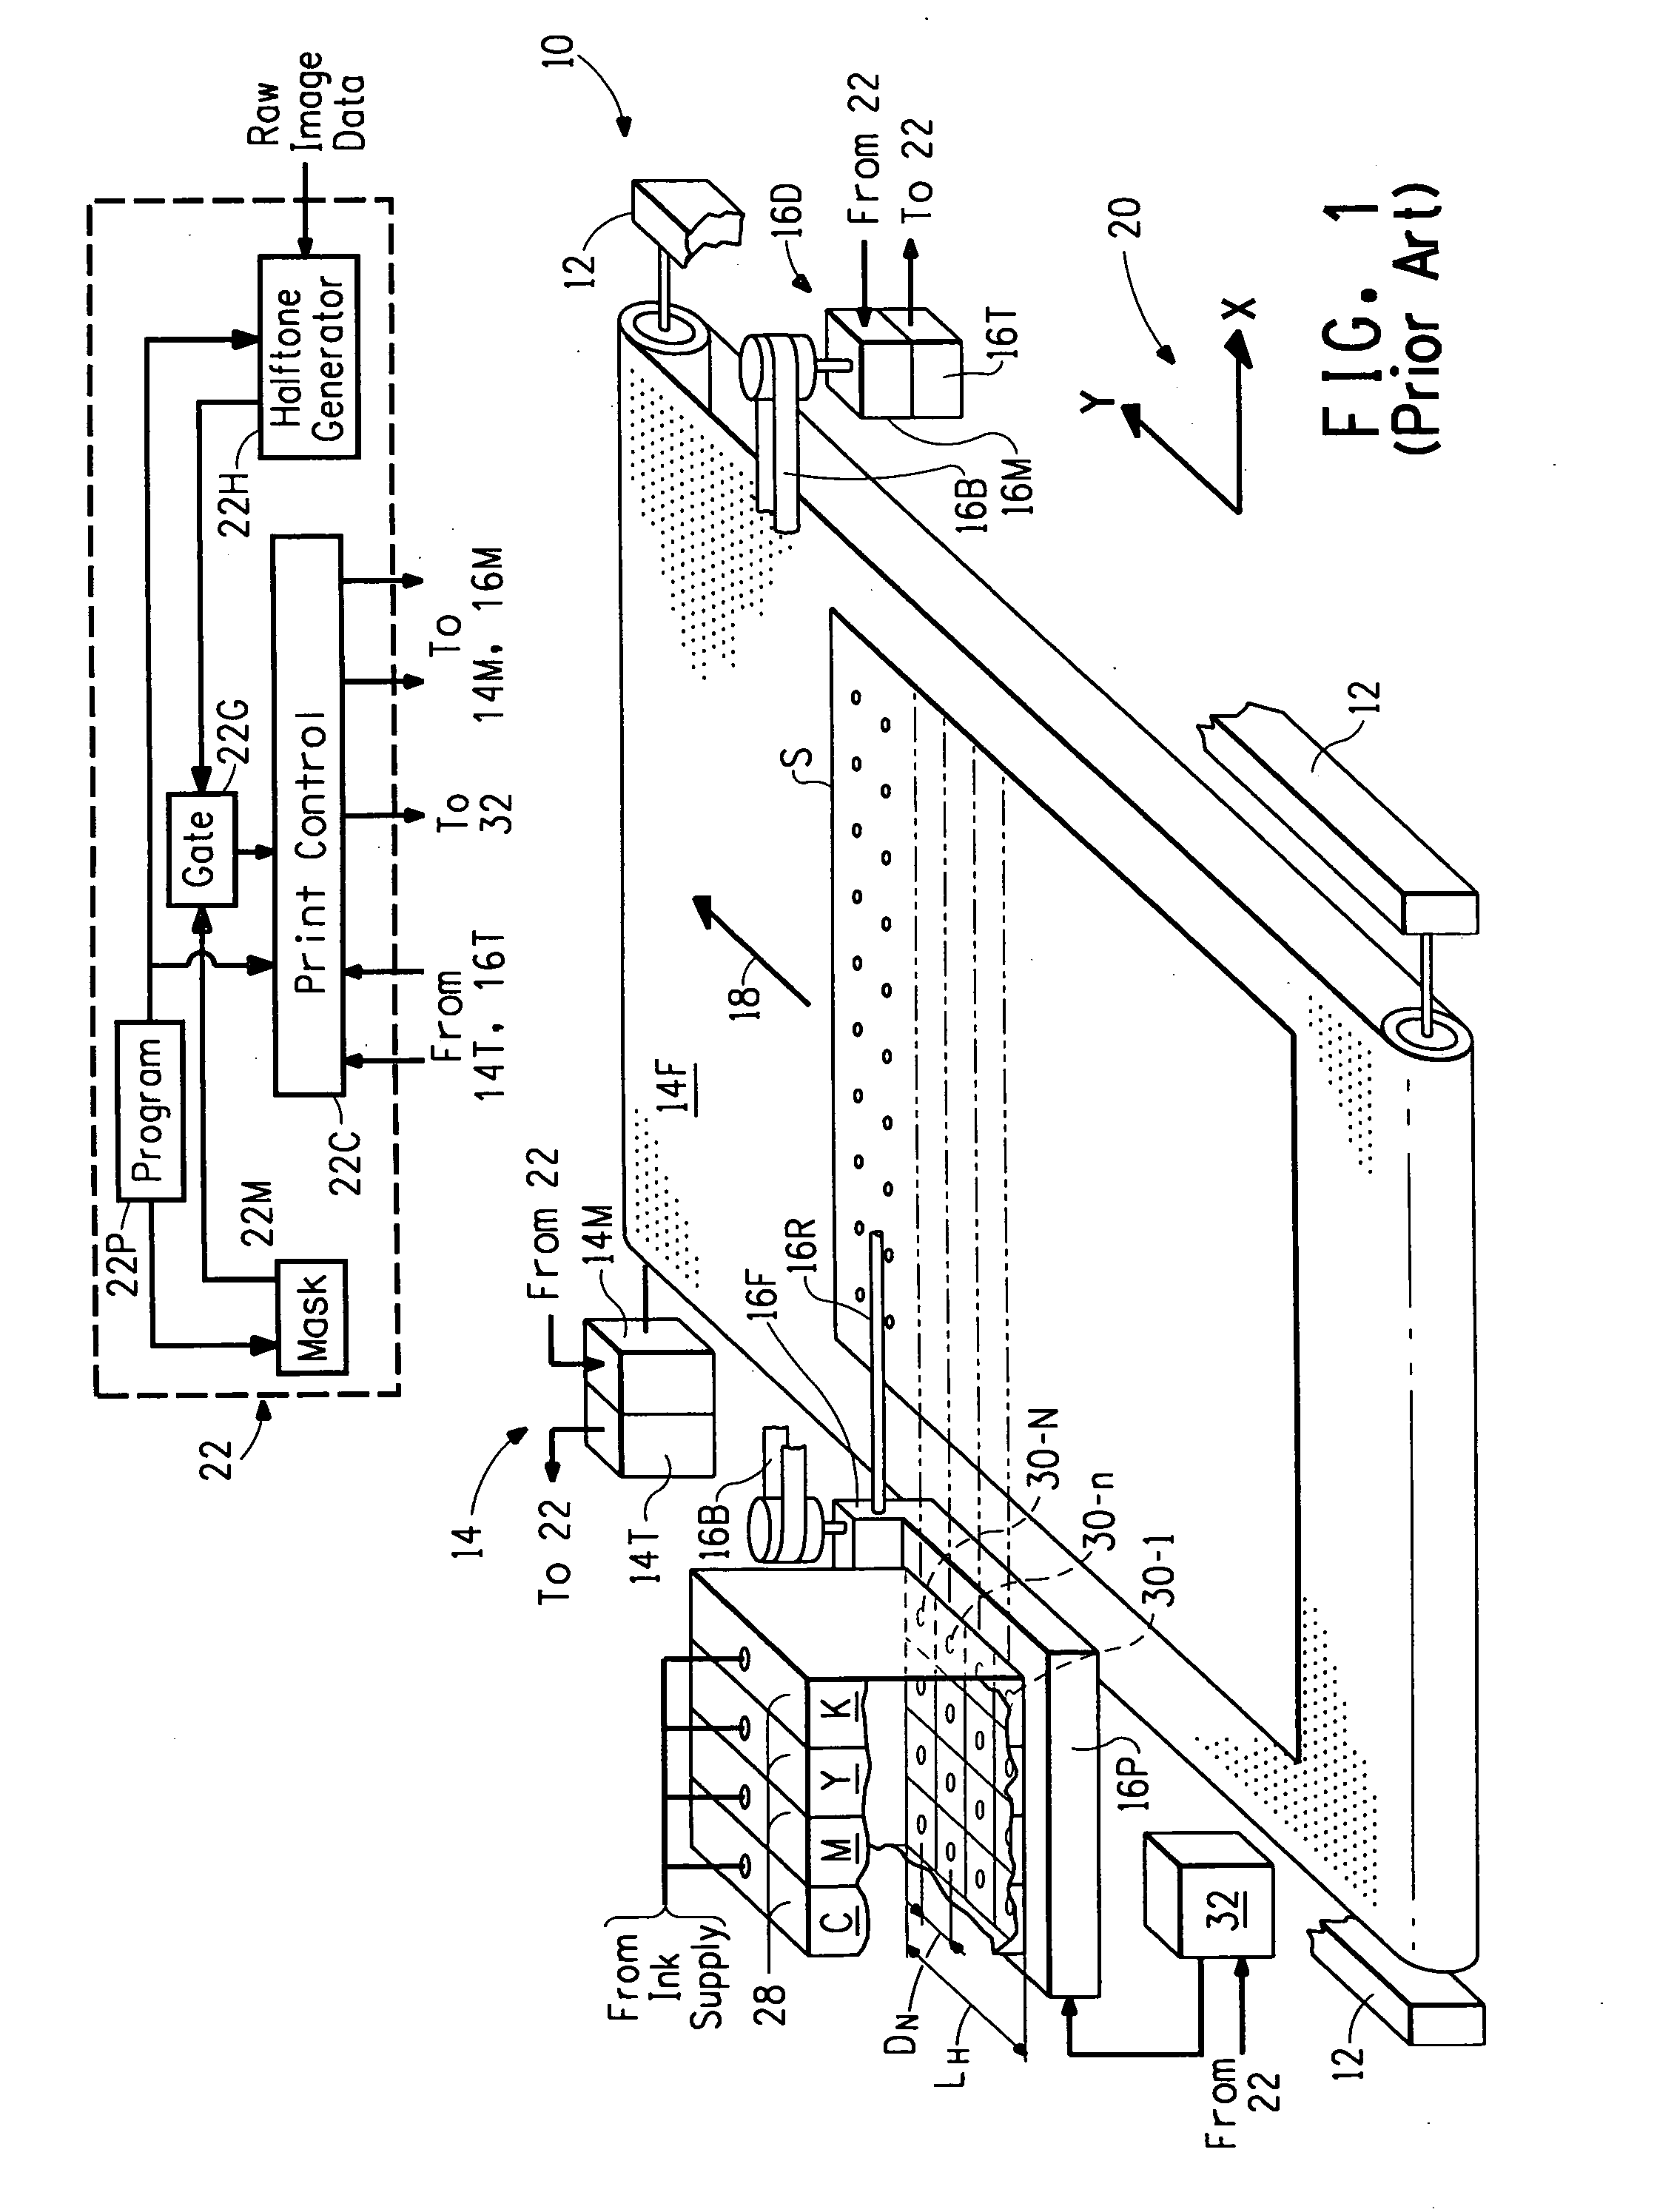 Computer readable medium with a program for minimizing banding artifacts in an ink jet printing apparatus